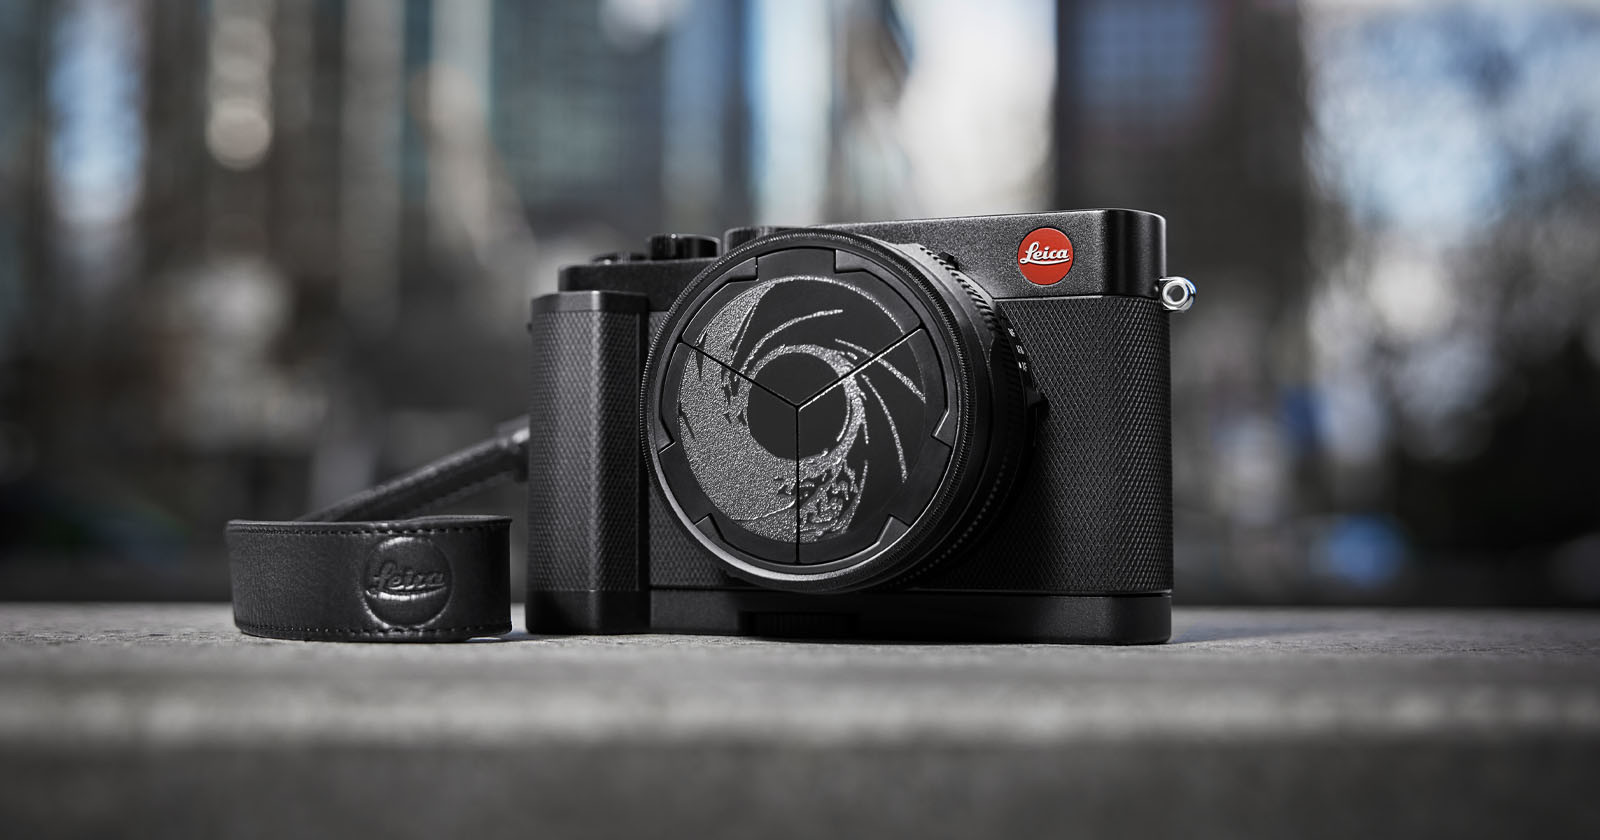  special 007 edition leica d-lux celebrates years james 